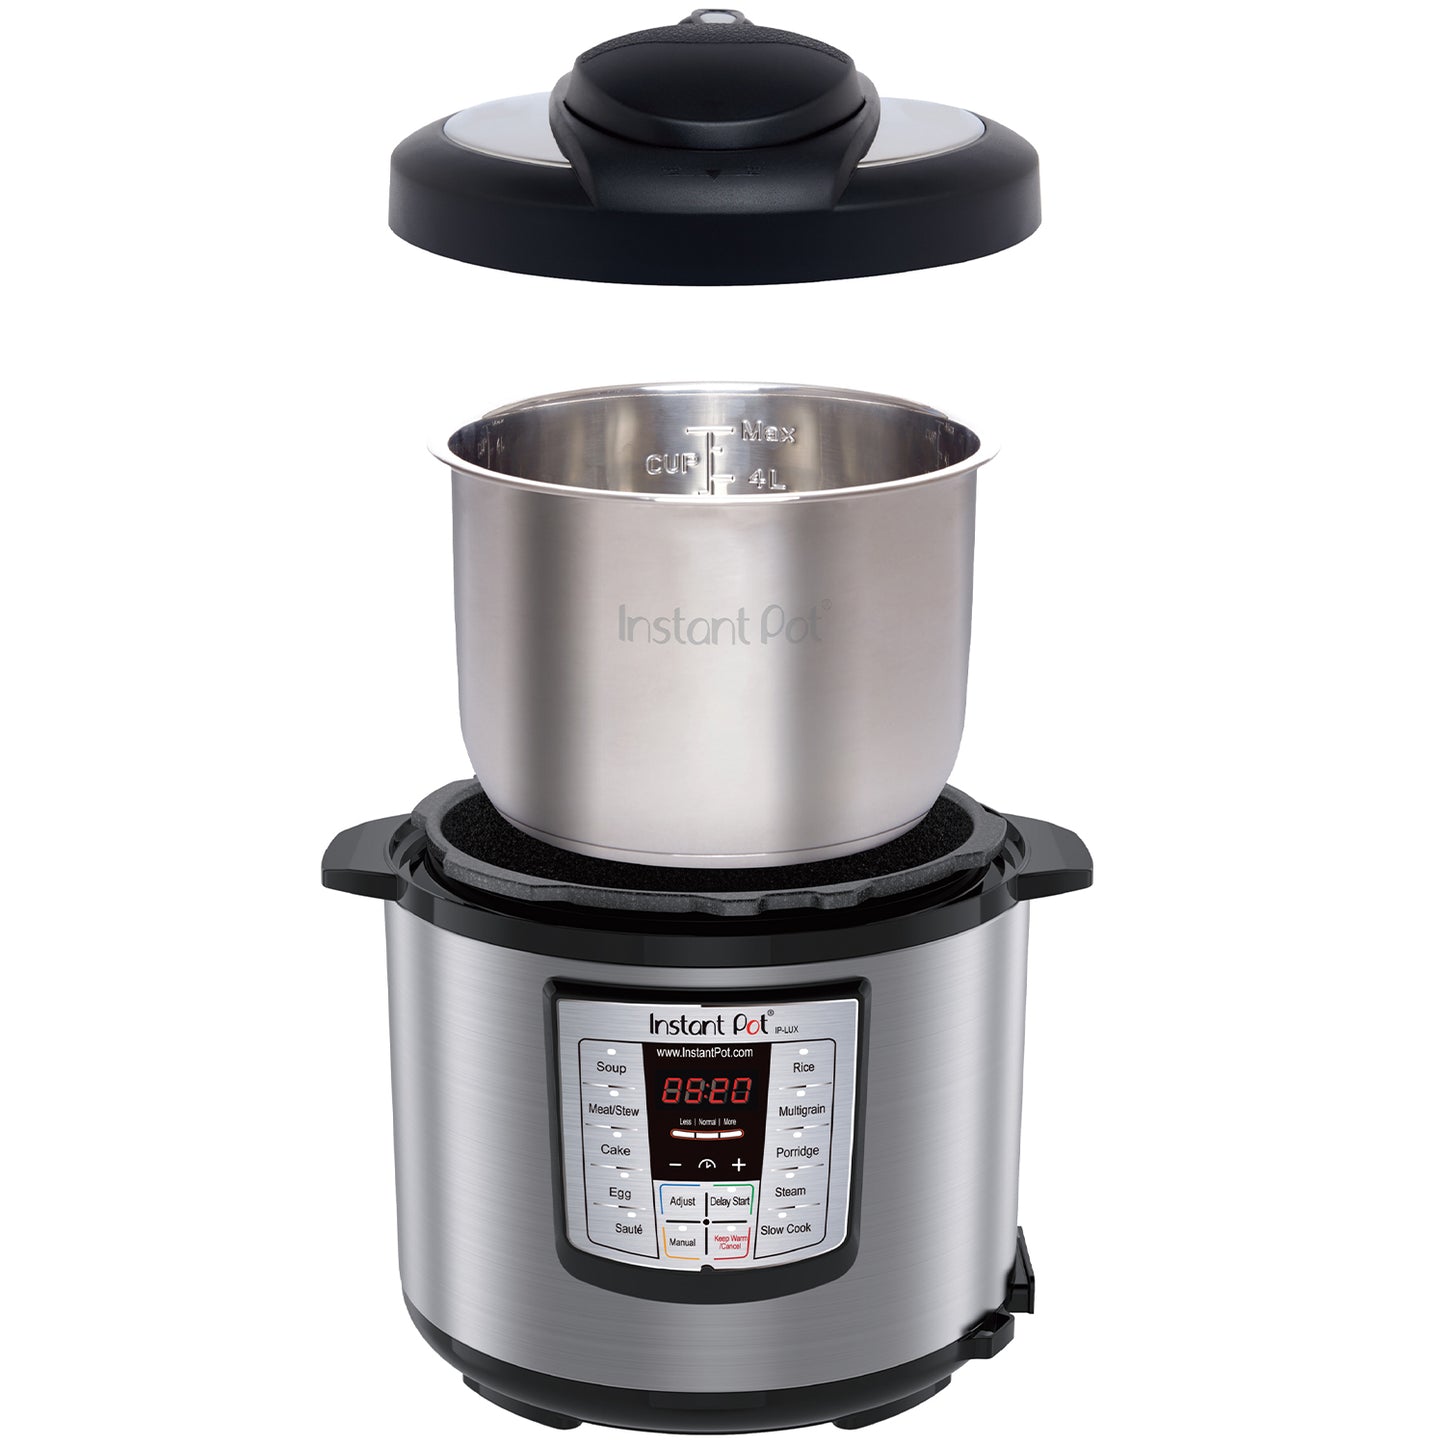 Instant Pot Duo Nova 8qt 7-in-1 One-Touch Multi-Use Programmable Elect ...